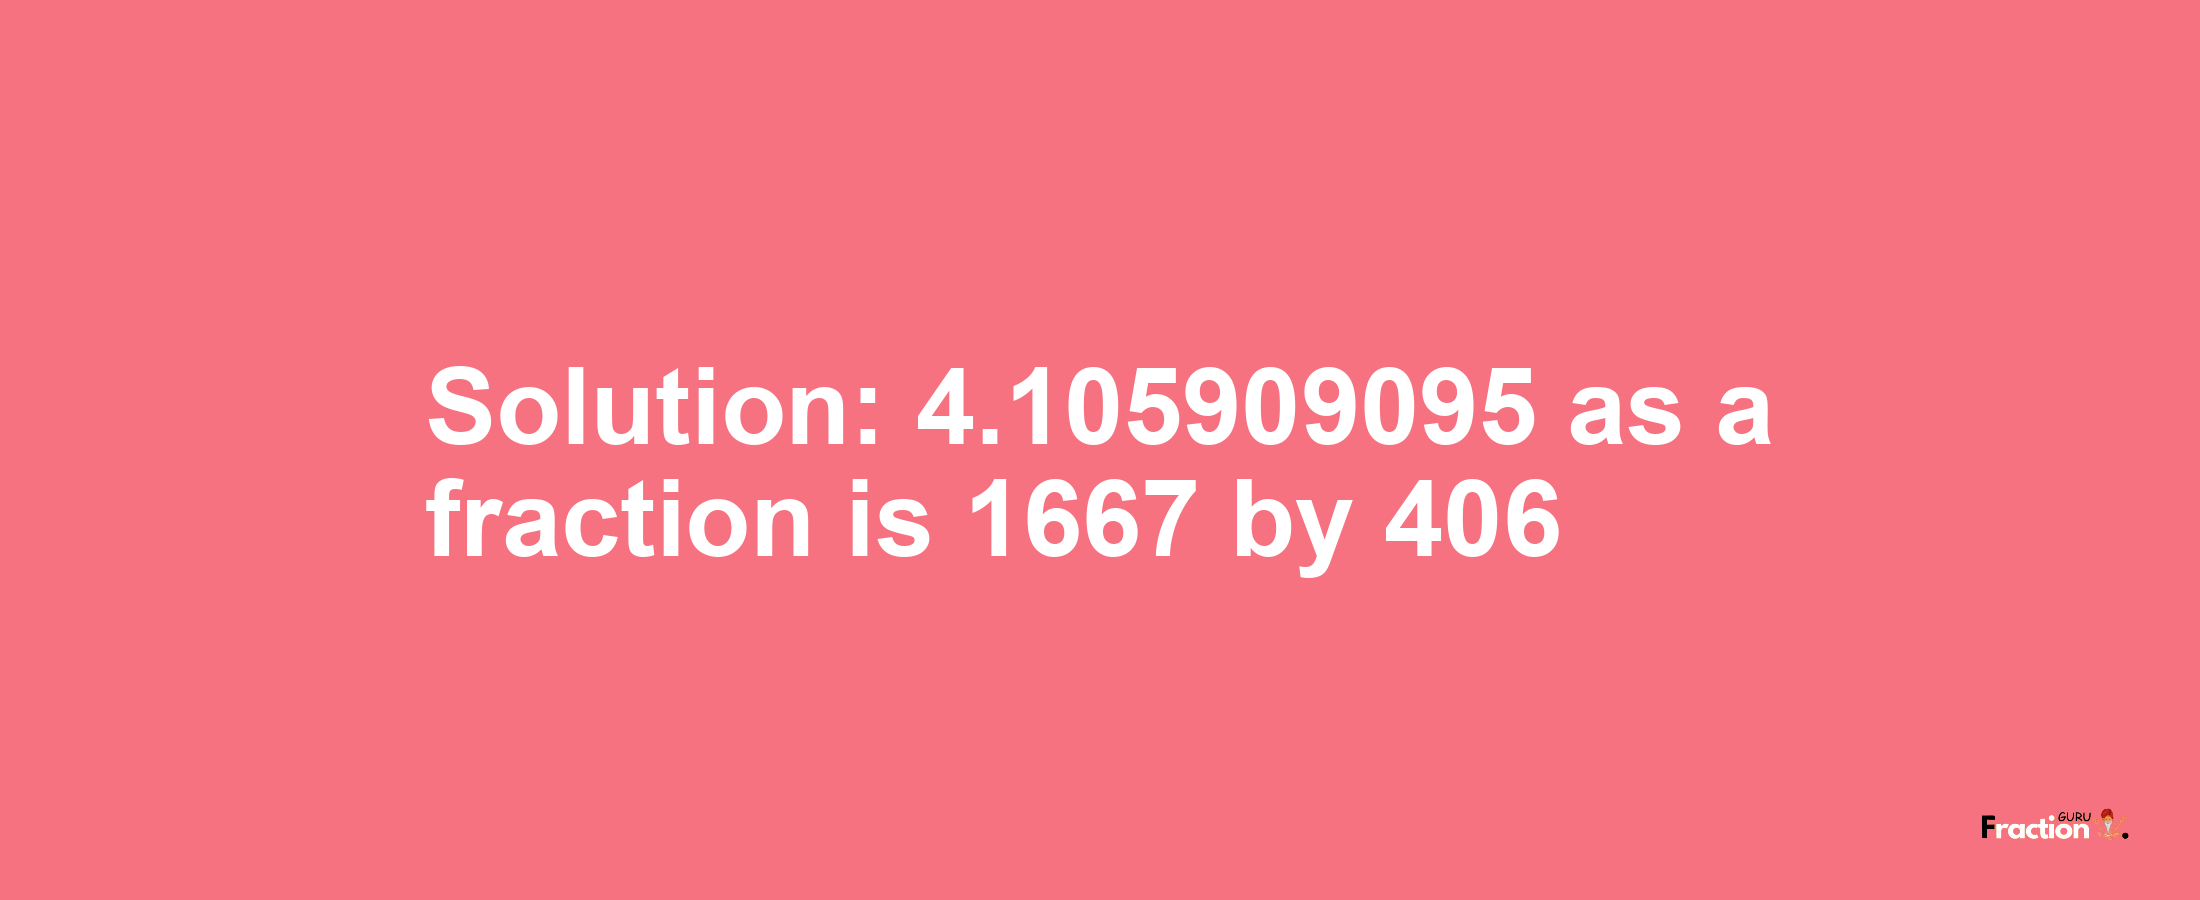 Solution:4.105909095 as a fraction is 1667/406